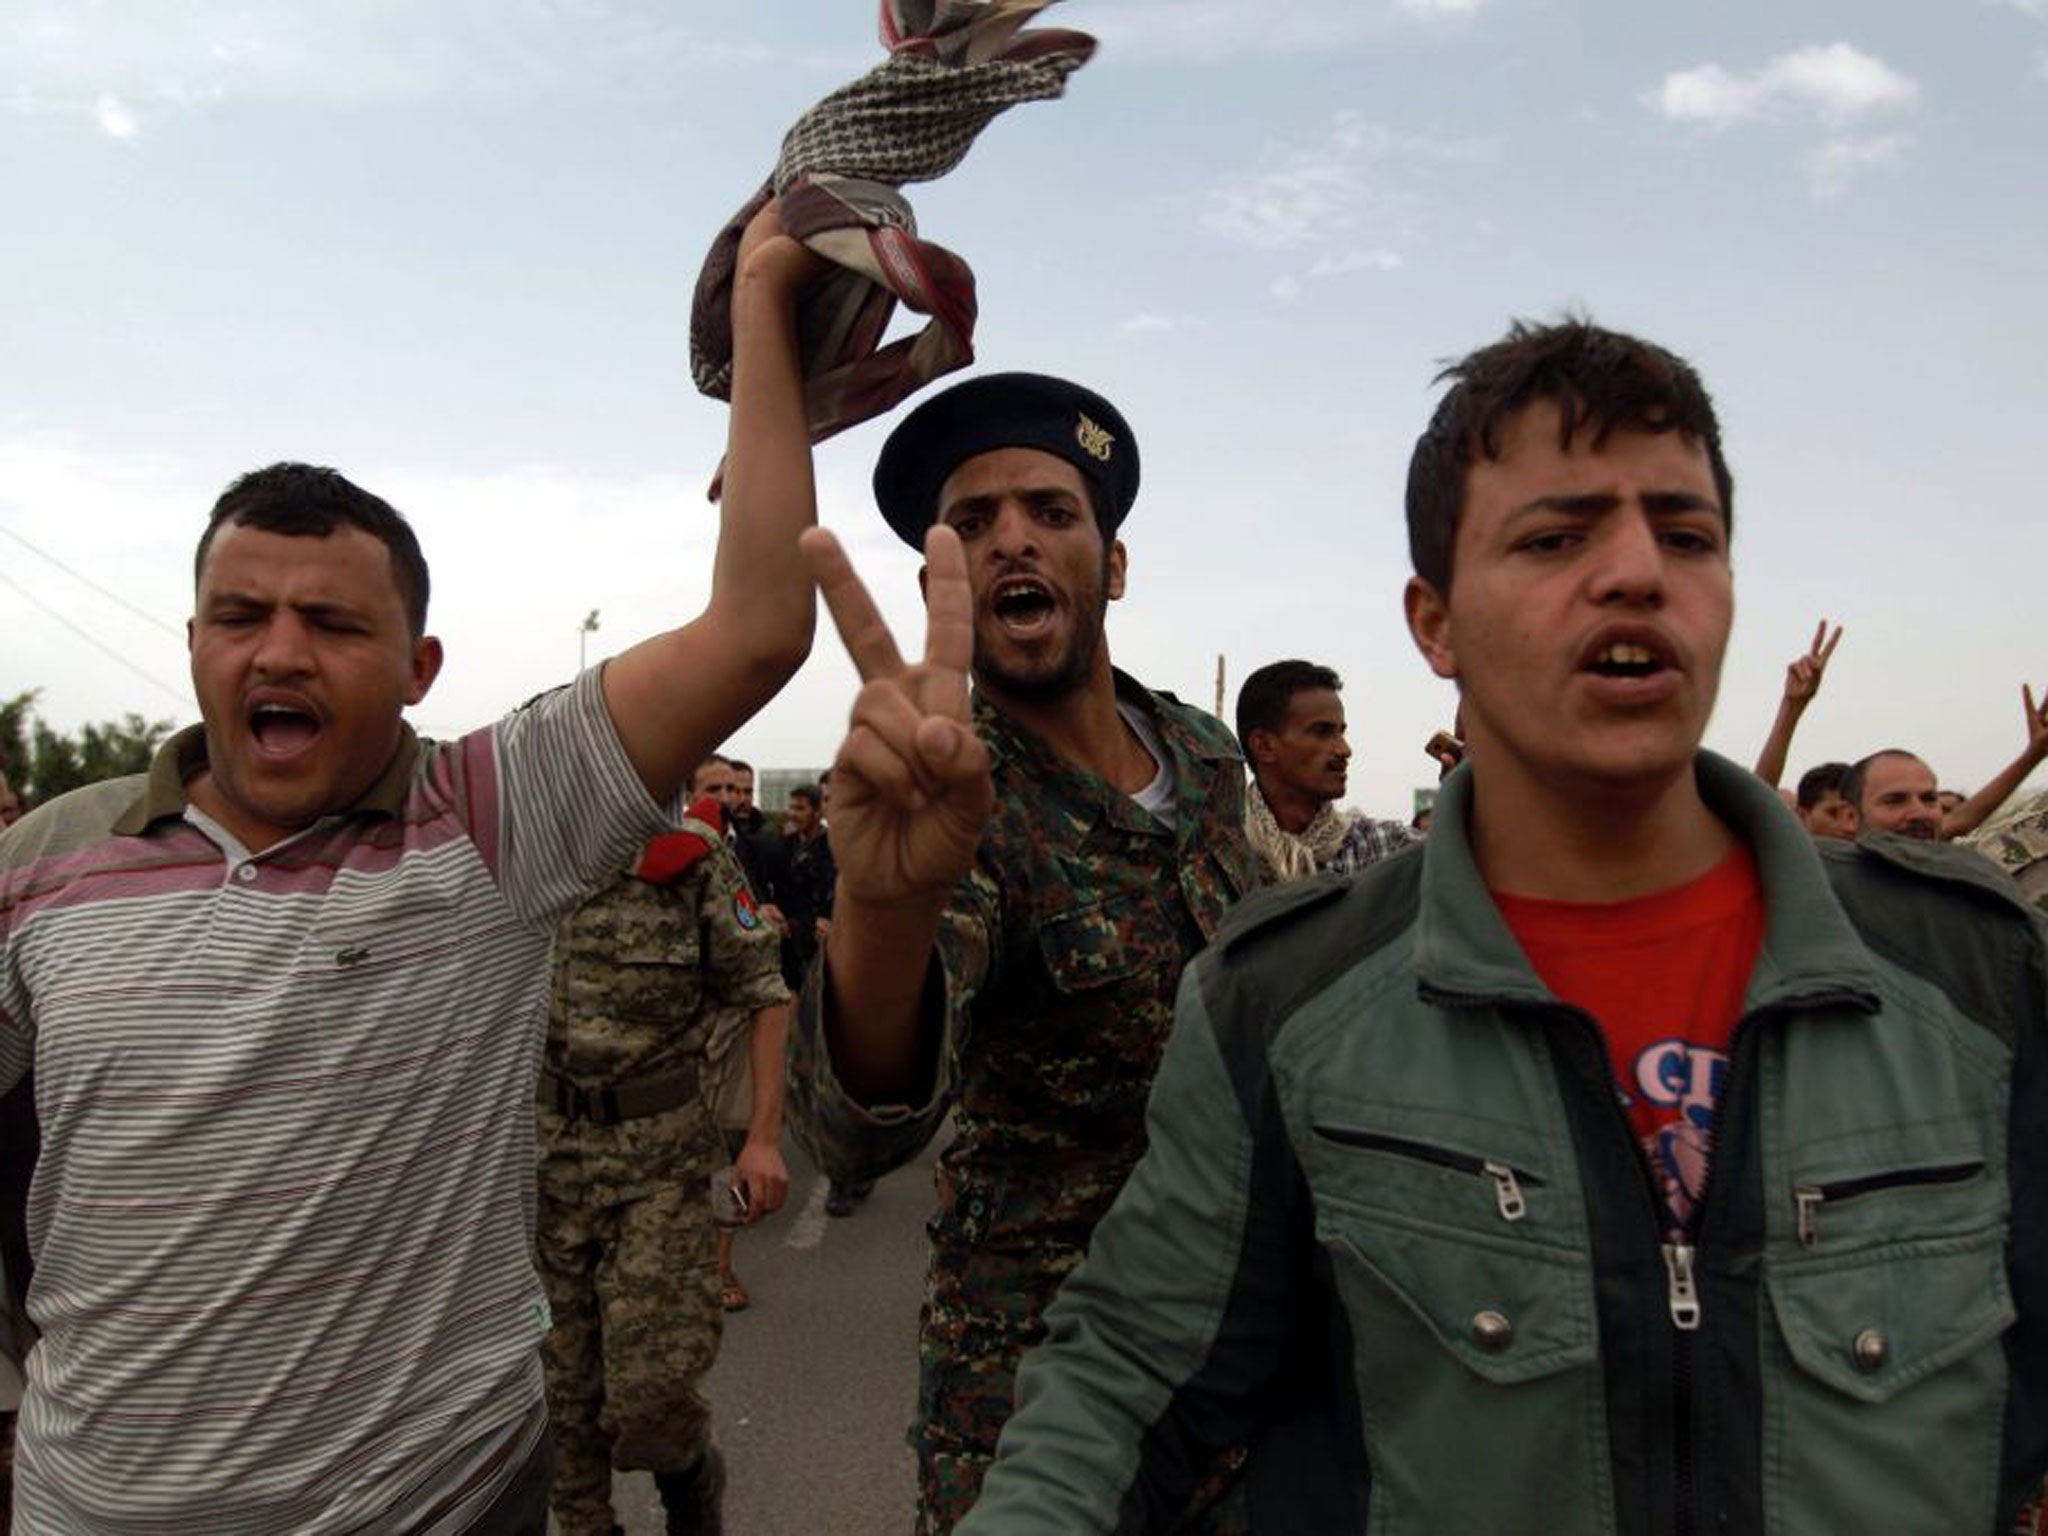 Yemeni protesting soldiers shout slogans following clashes in Sana'a